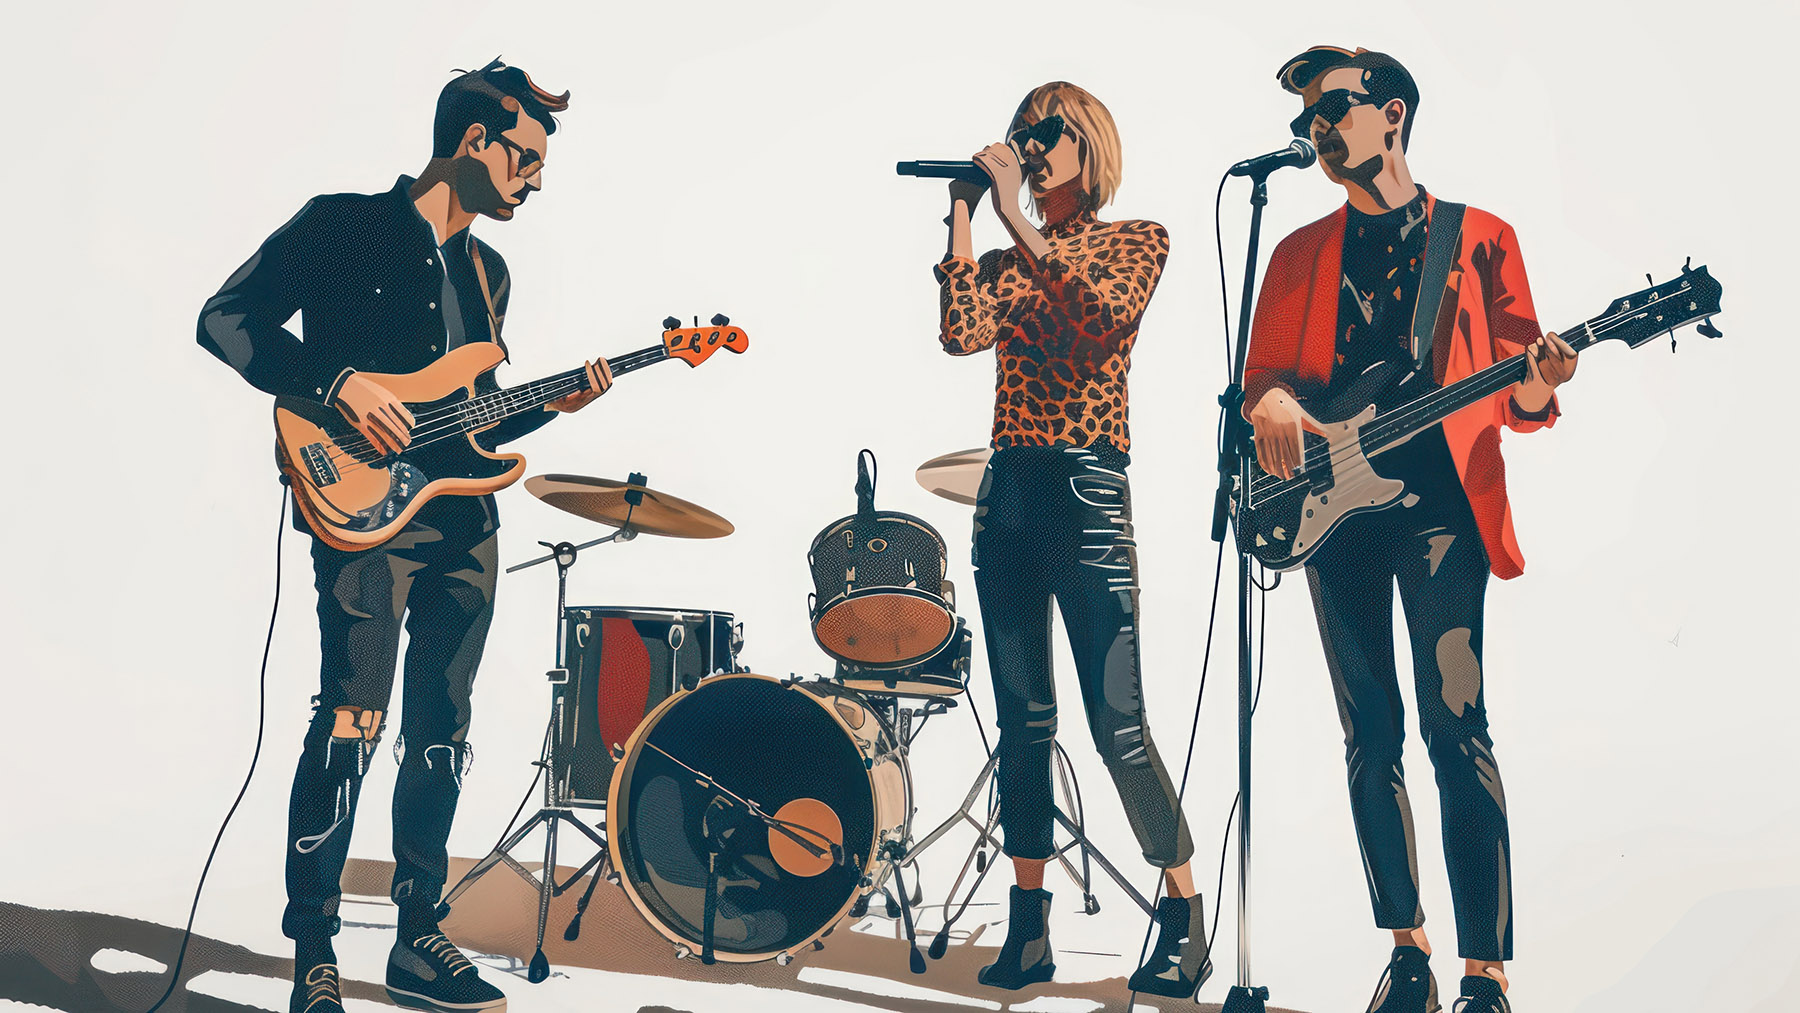 Color illustration of a three-member band performing guitar, drums, and vocals (Stock image courtesy of RawPixel.com)